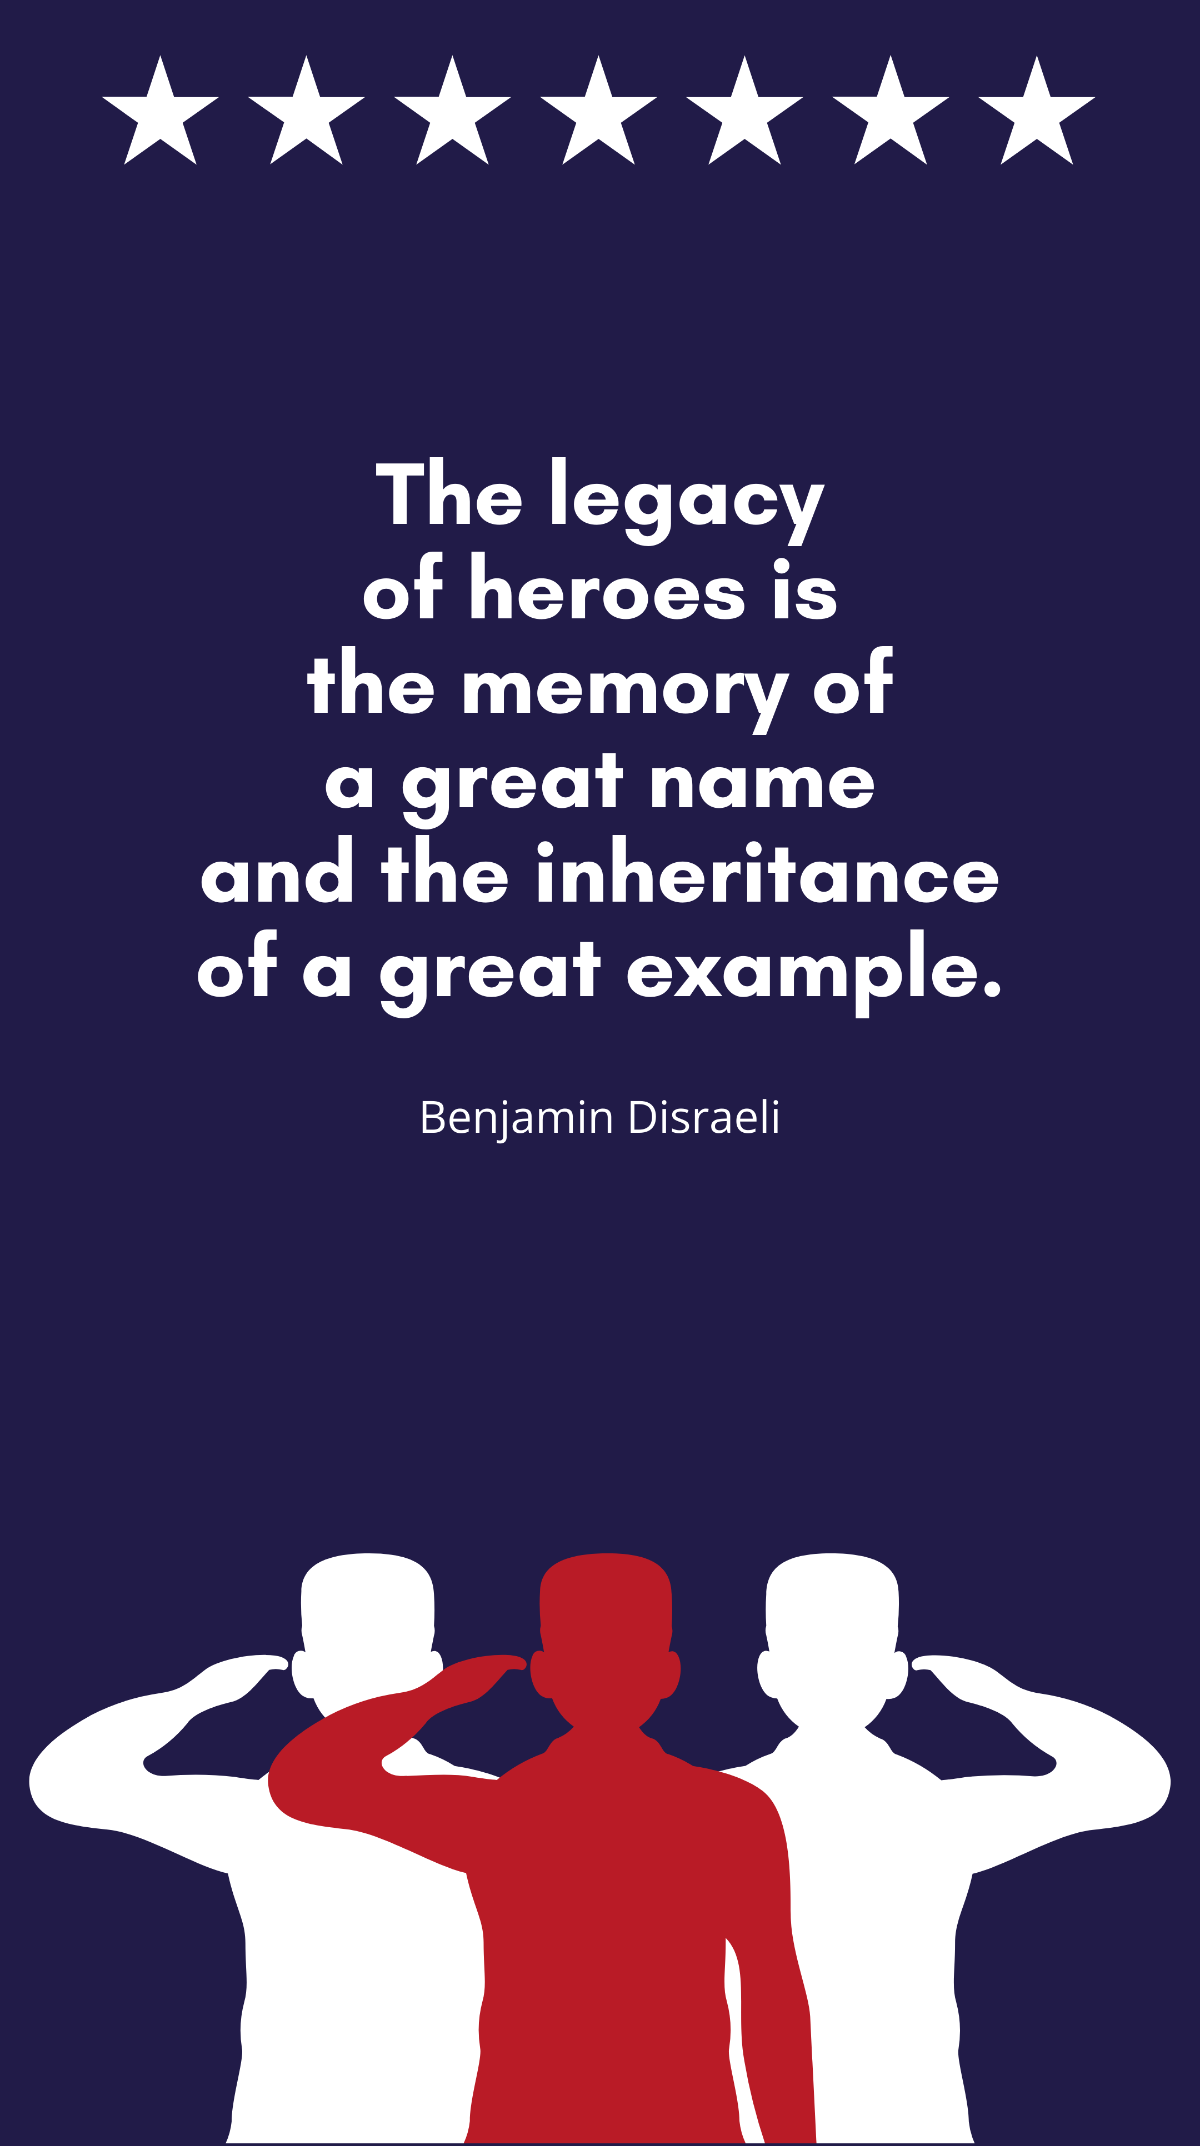 Free Benjamin Disraeli - “The legacy of heroes is the memory of a great name and the inheritance of a great example.” Template